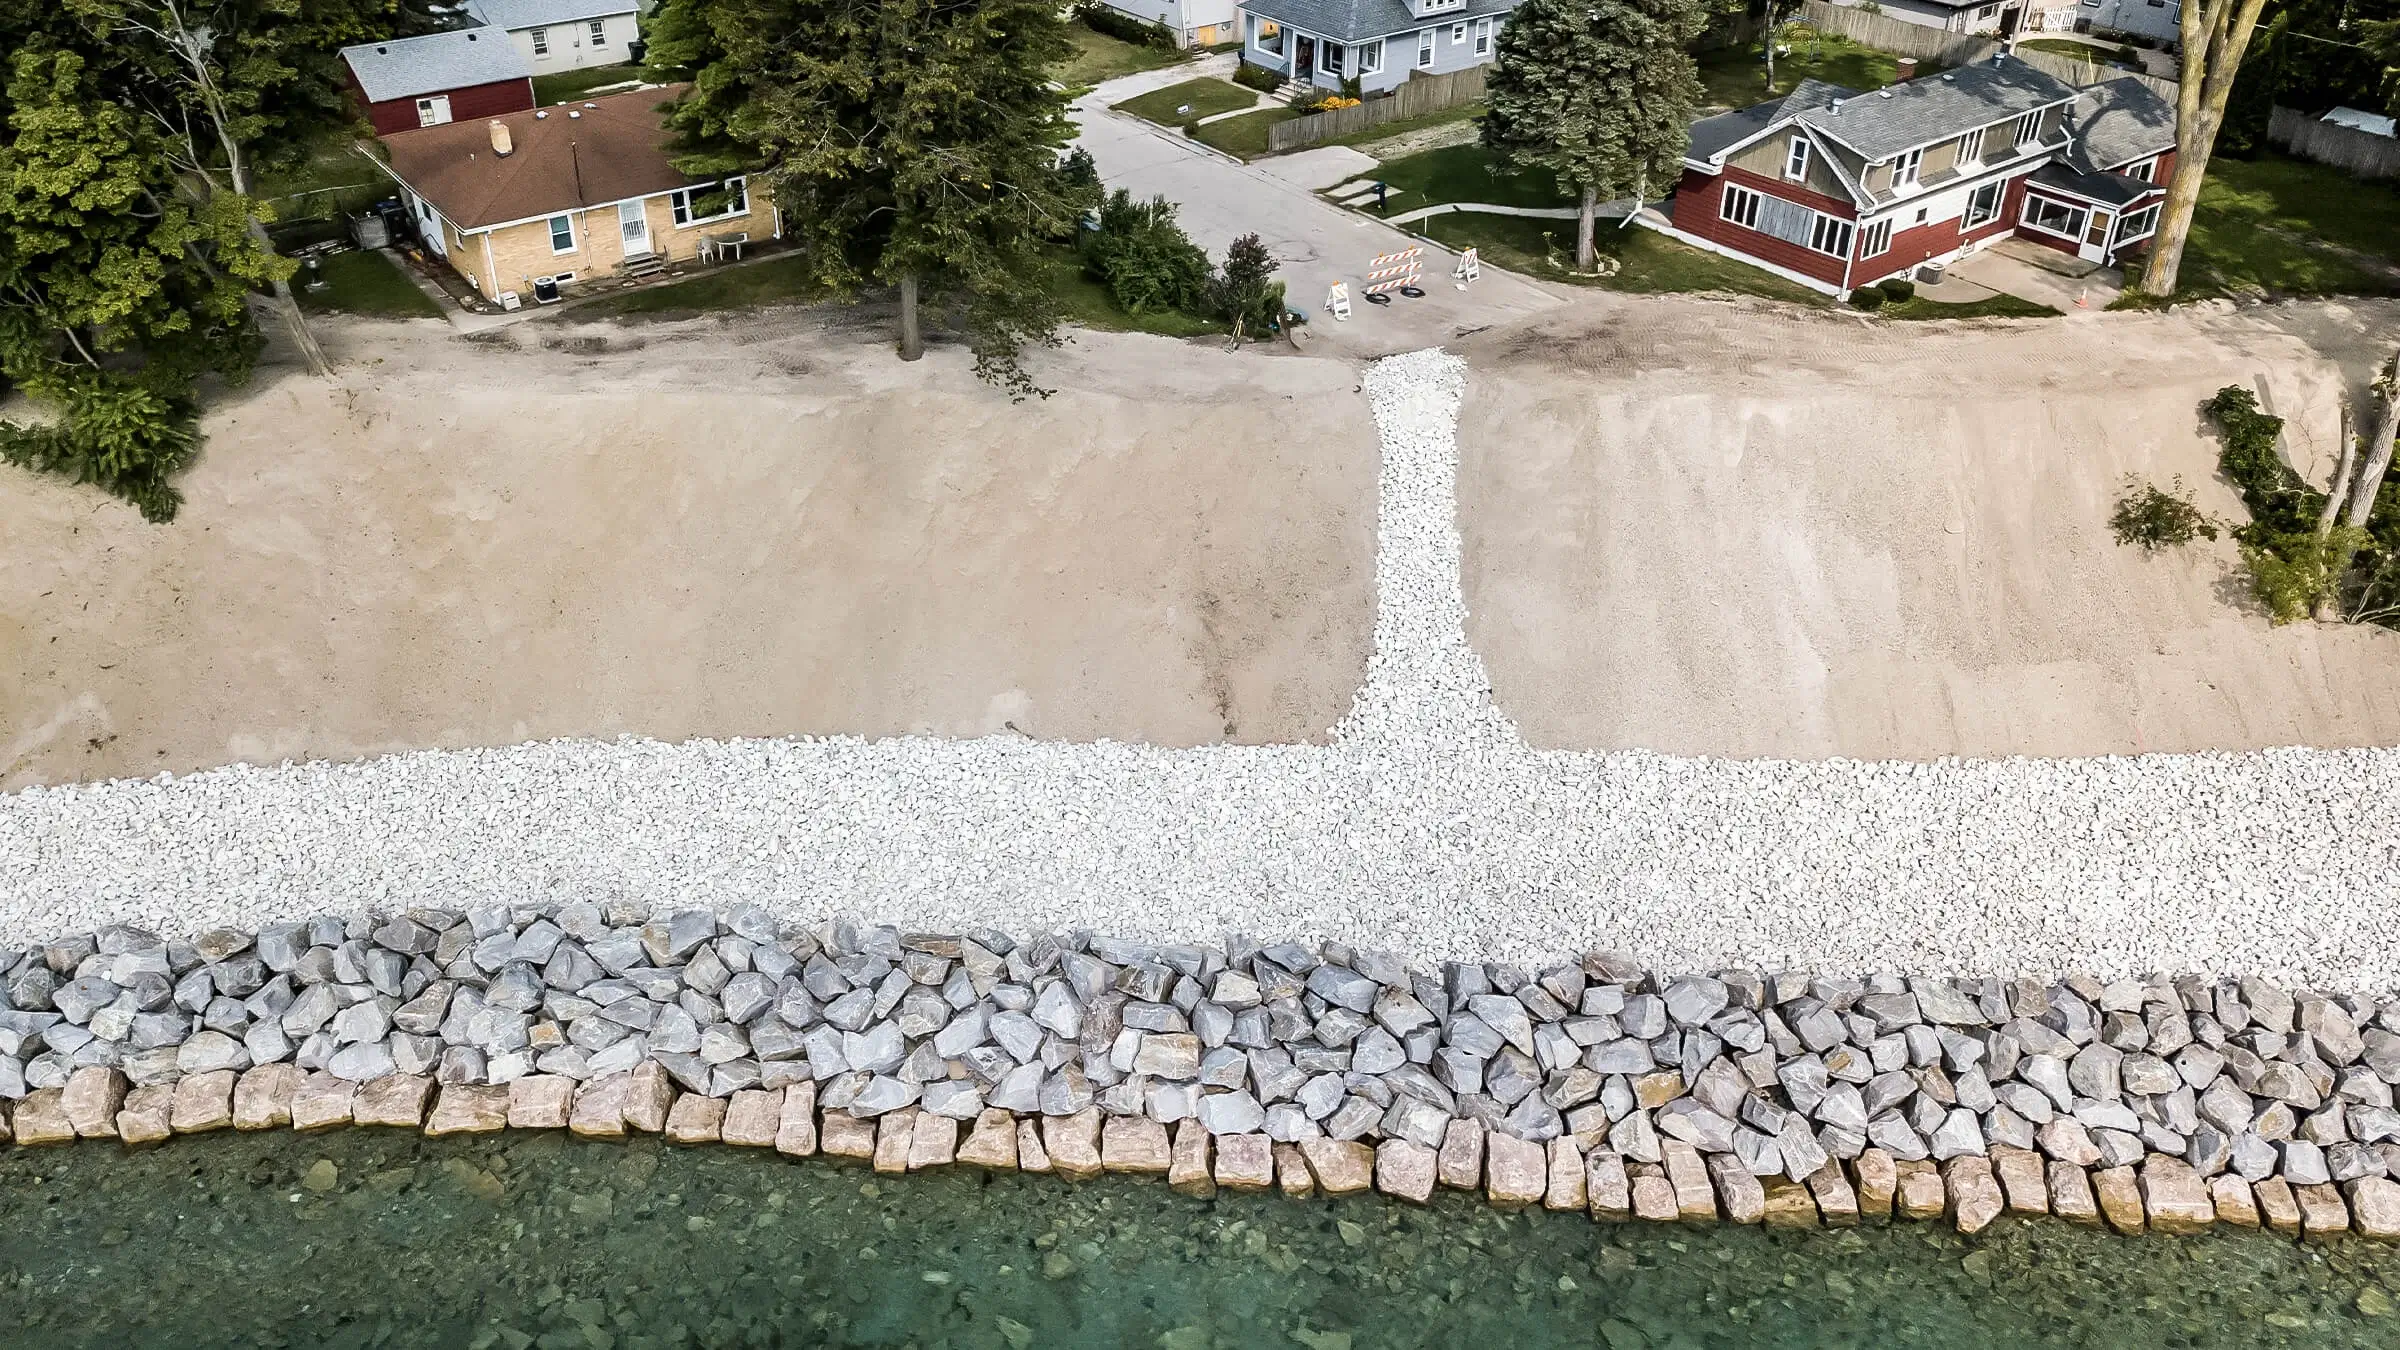 Riprap and armor stone are used to reinforce an eroding lakeshore